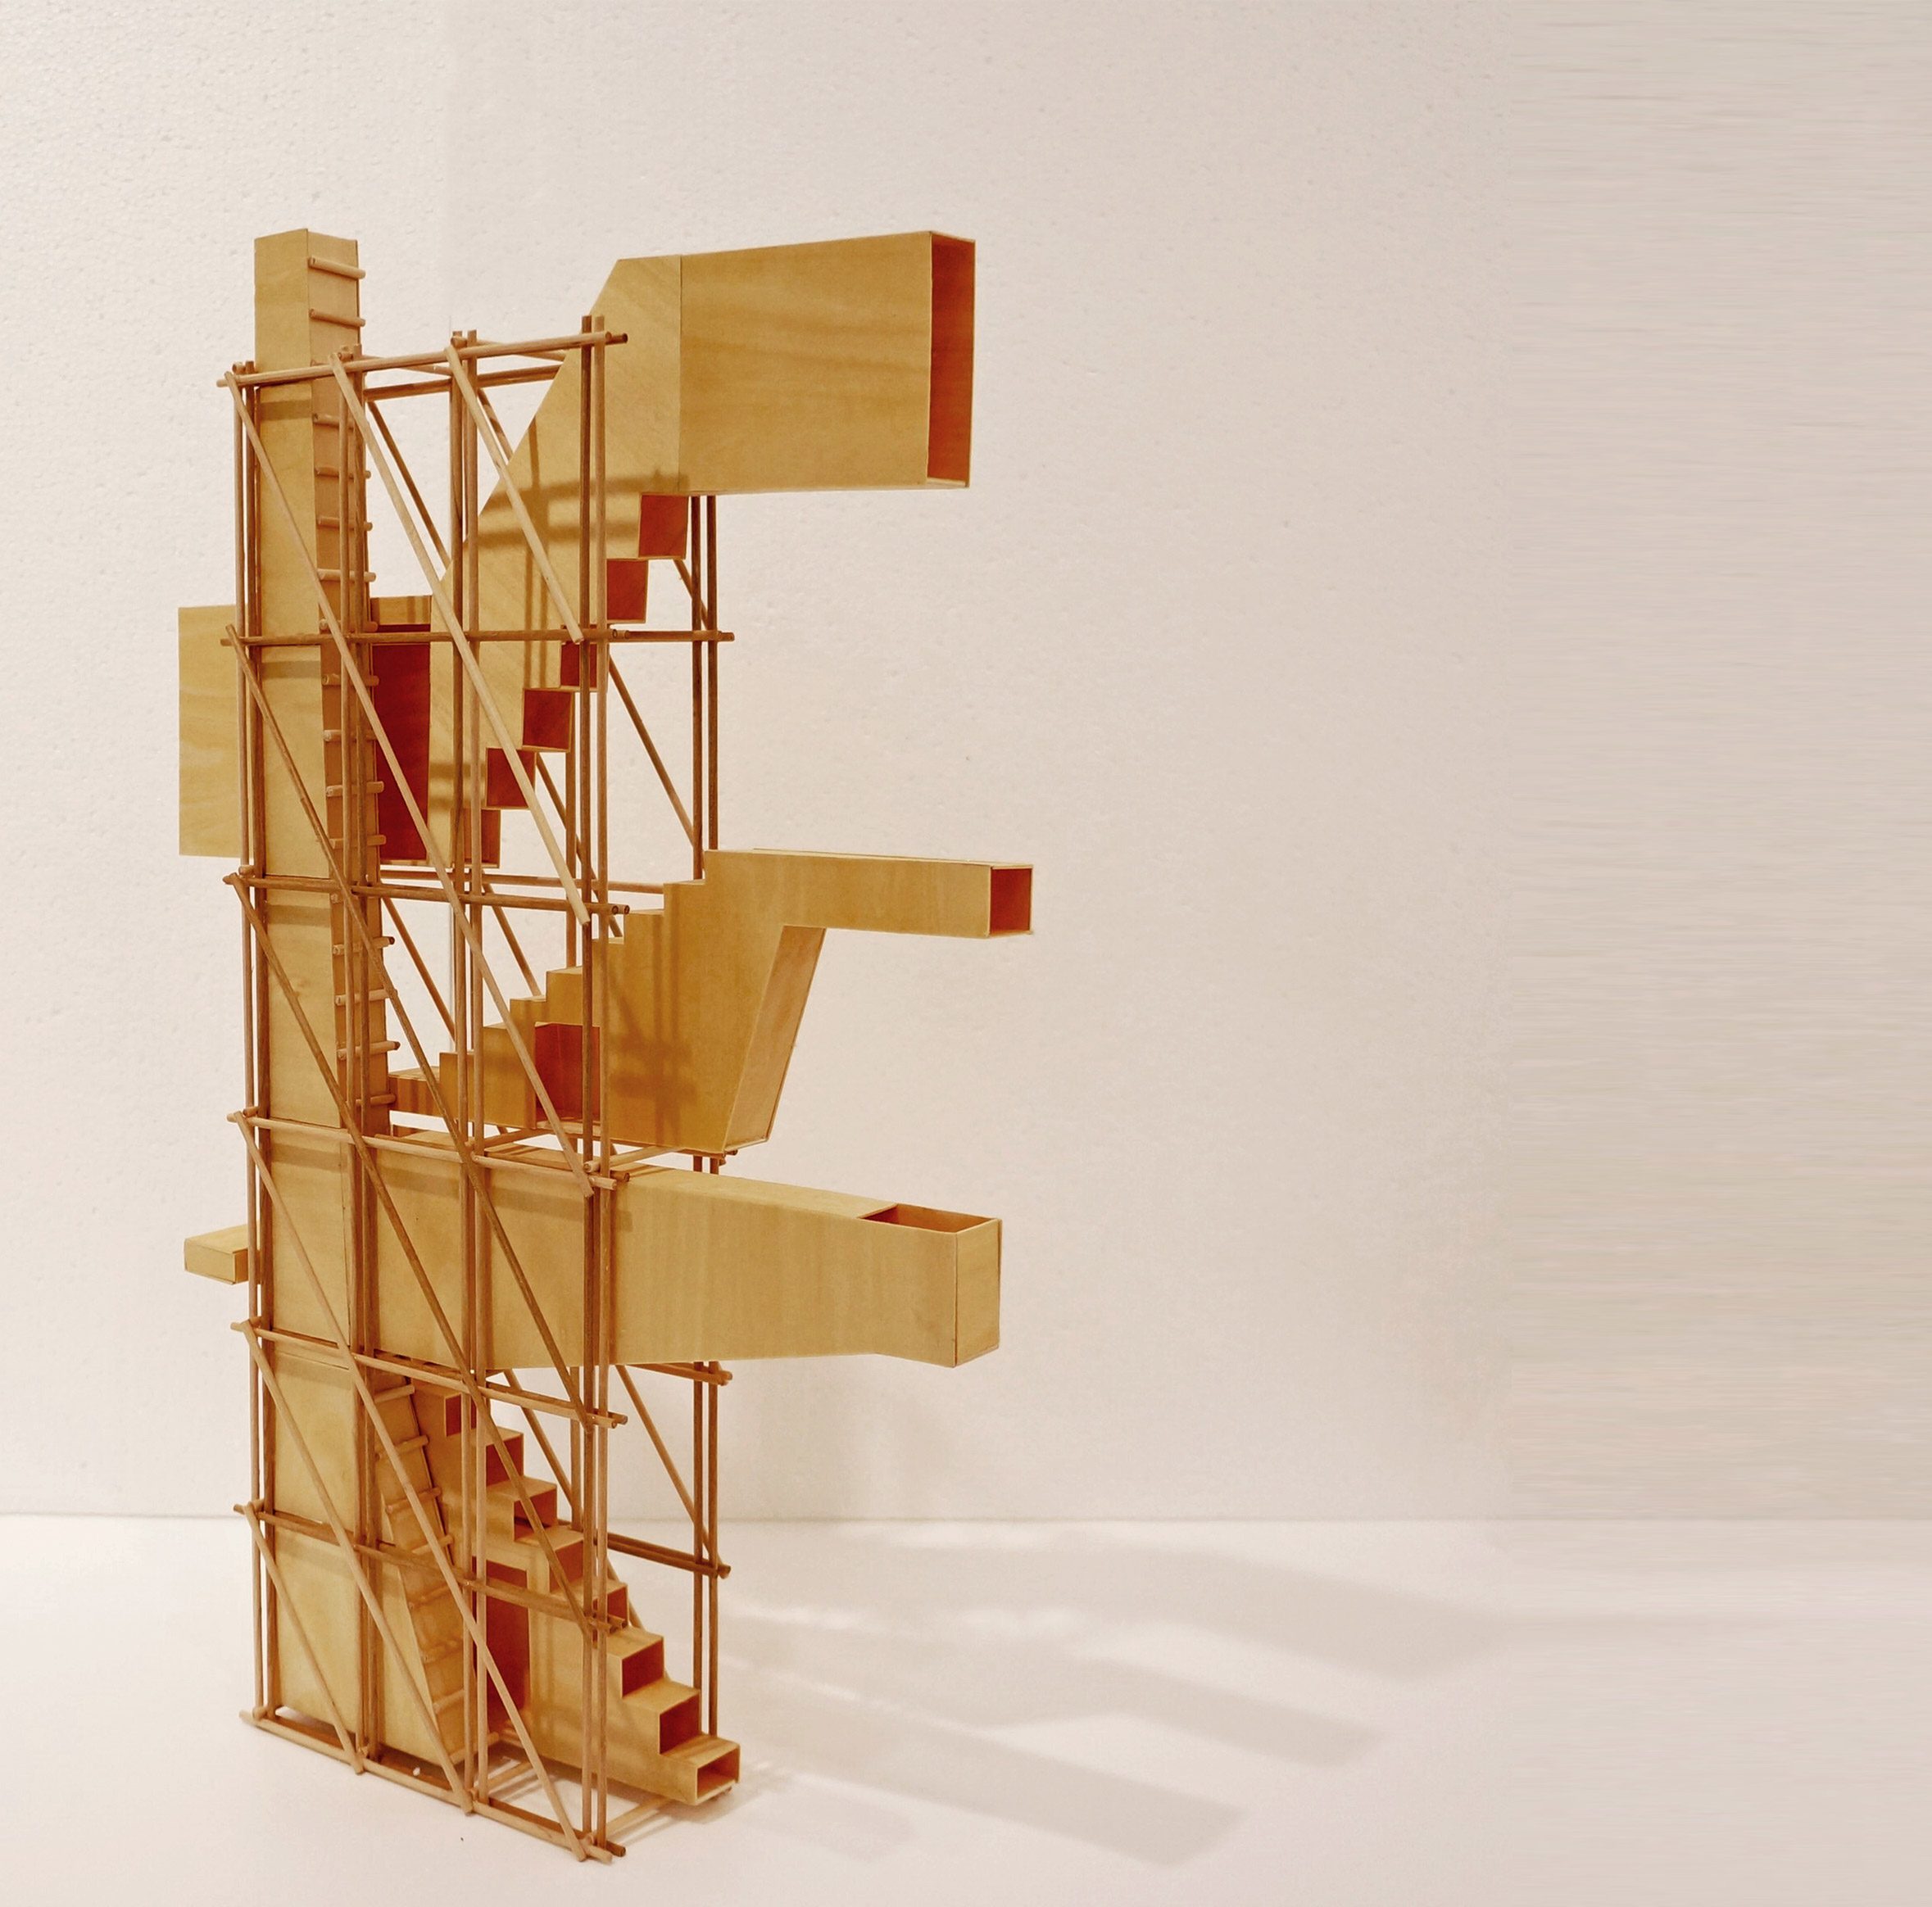 Image of a wooden model with stairs